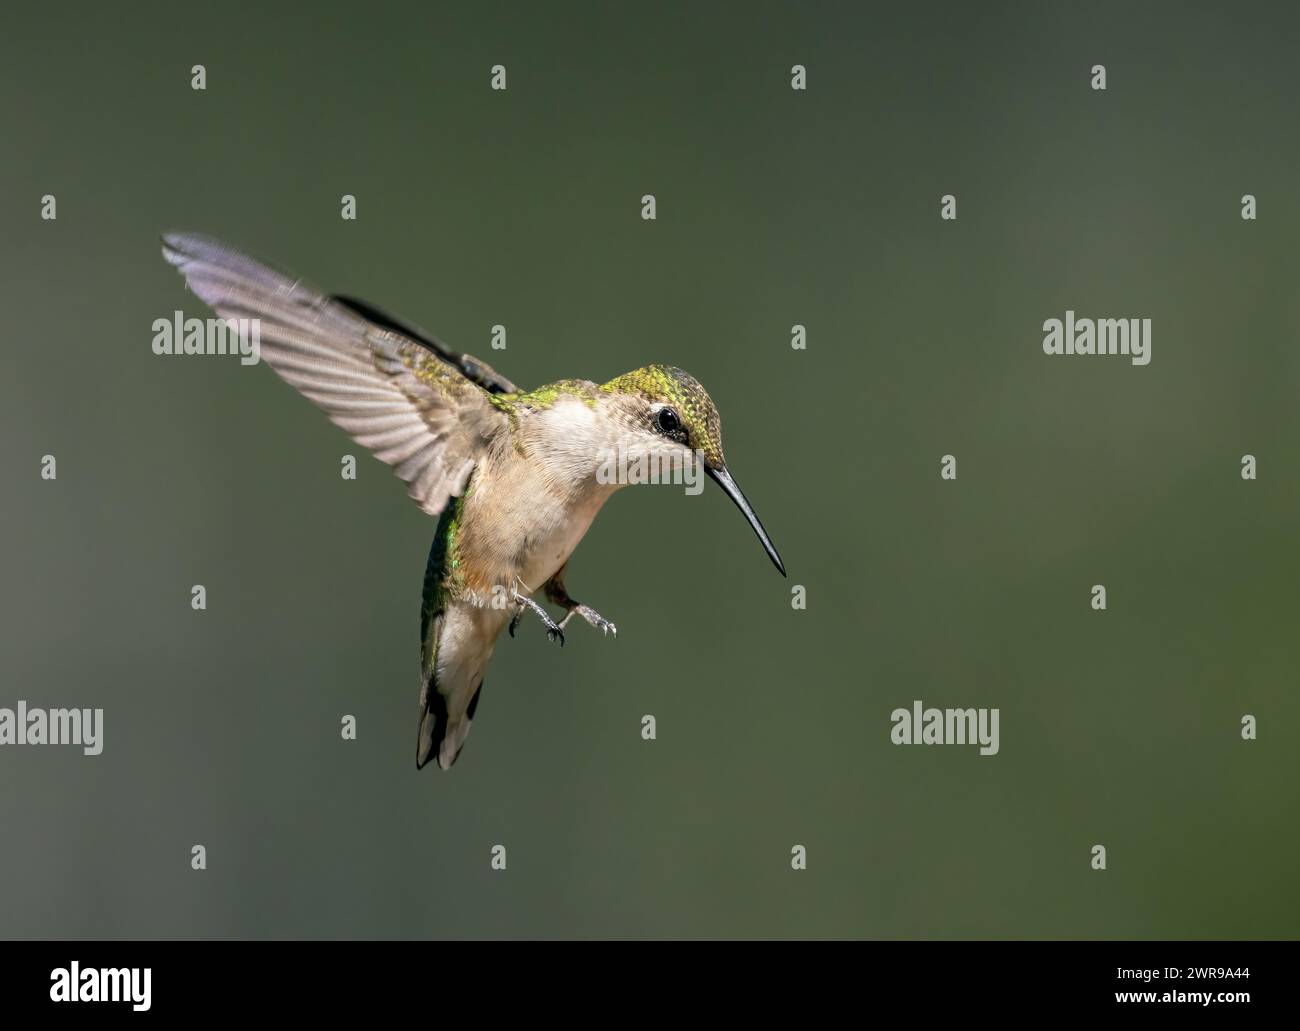 Female hummingbird hovers in flight agains green background with room for text Stock Photo